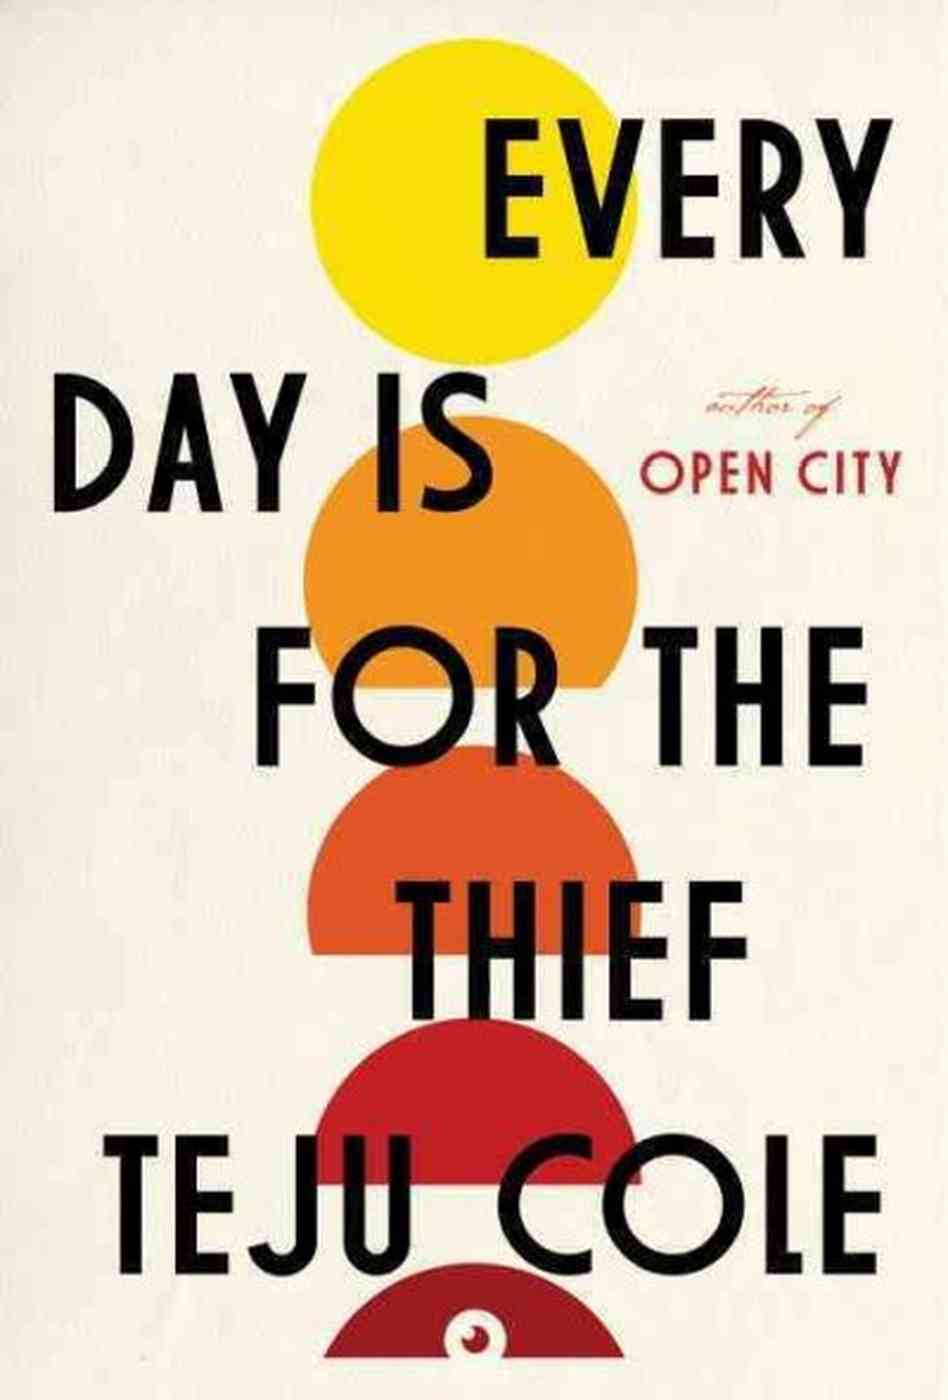 1000 Words – Every Day is for the Thief by Teju Cole